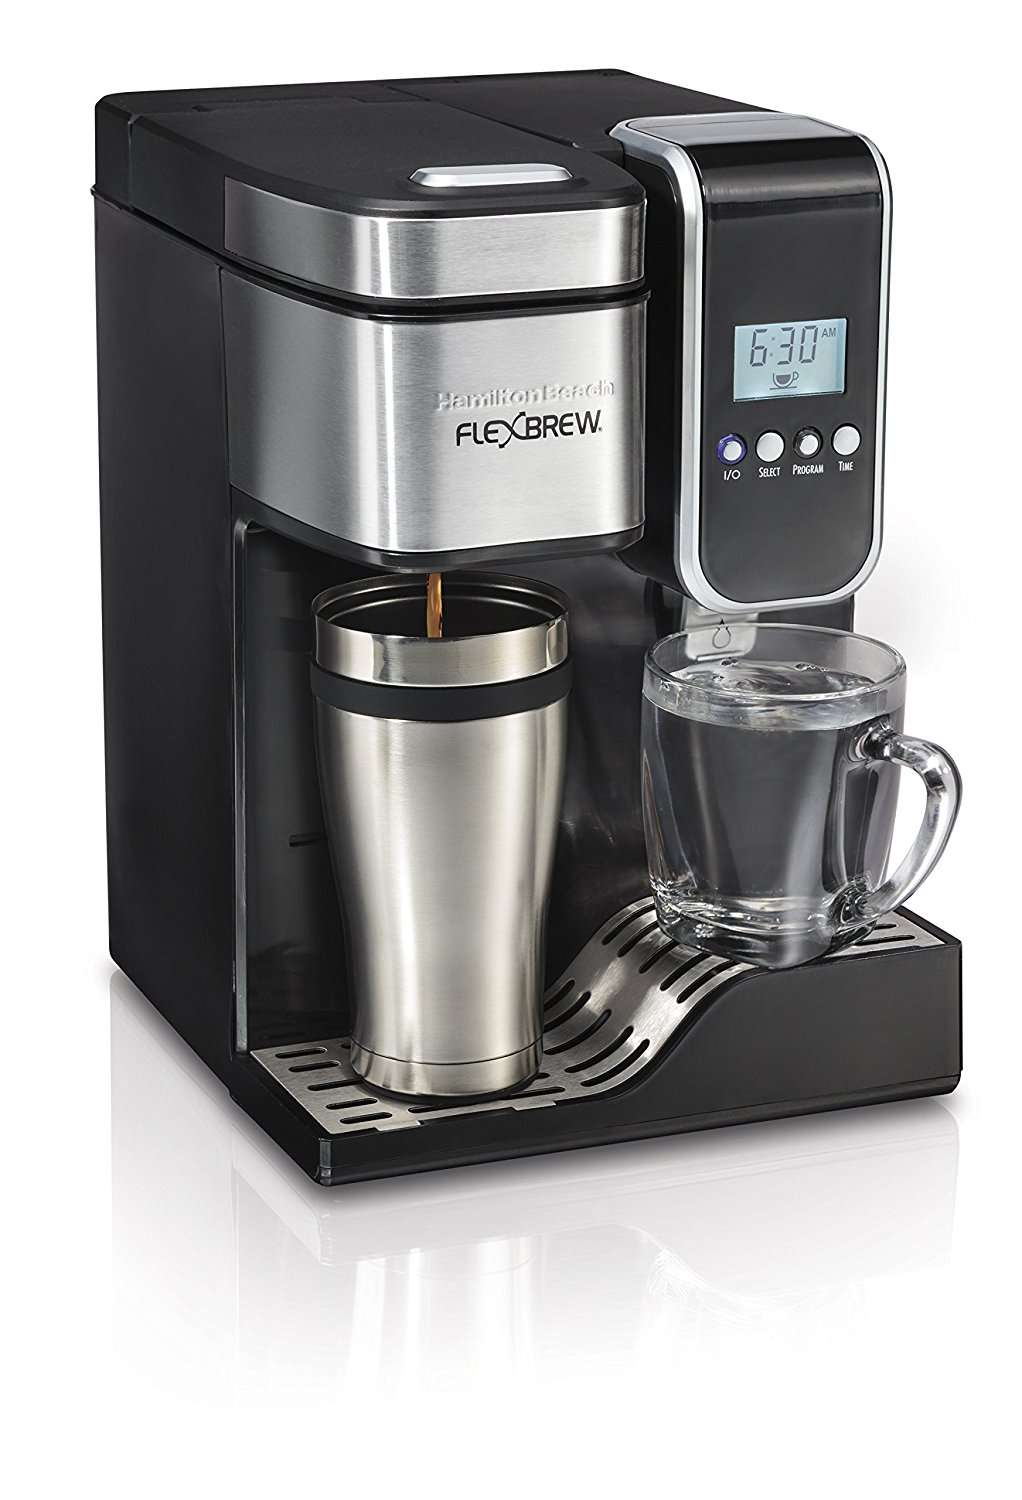 Top 10 Best Coffee Maker For Home and Office